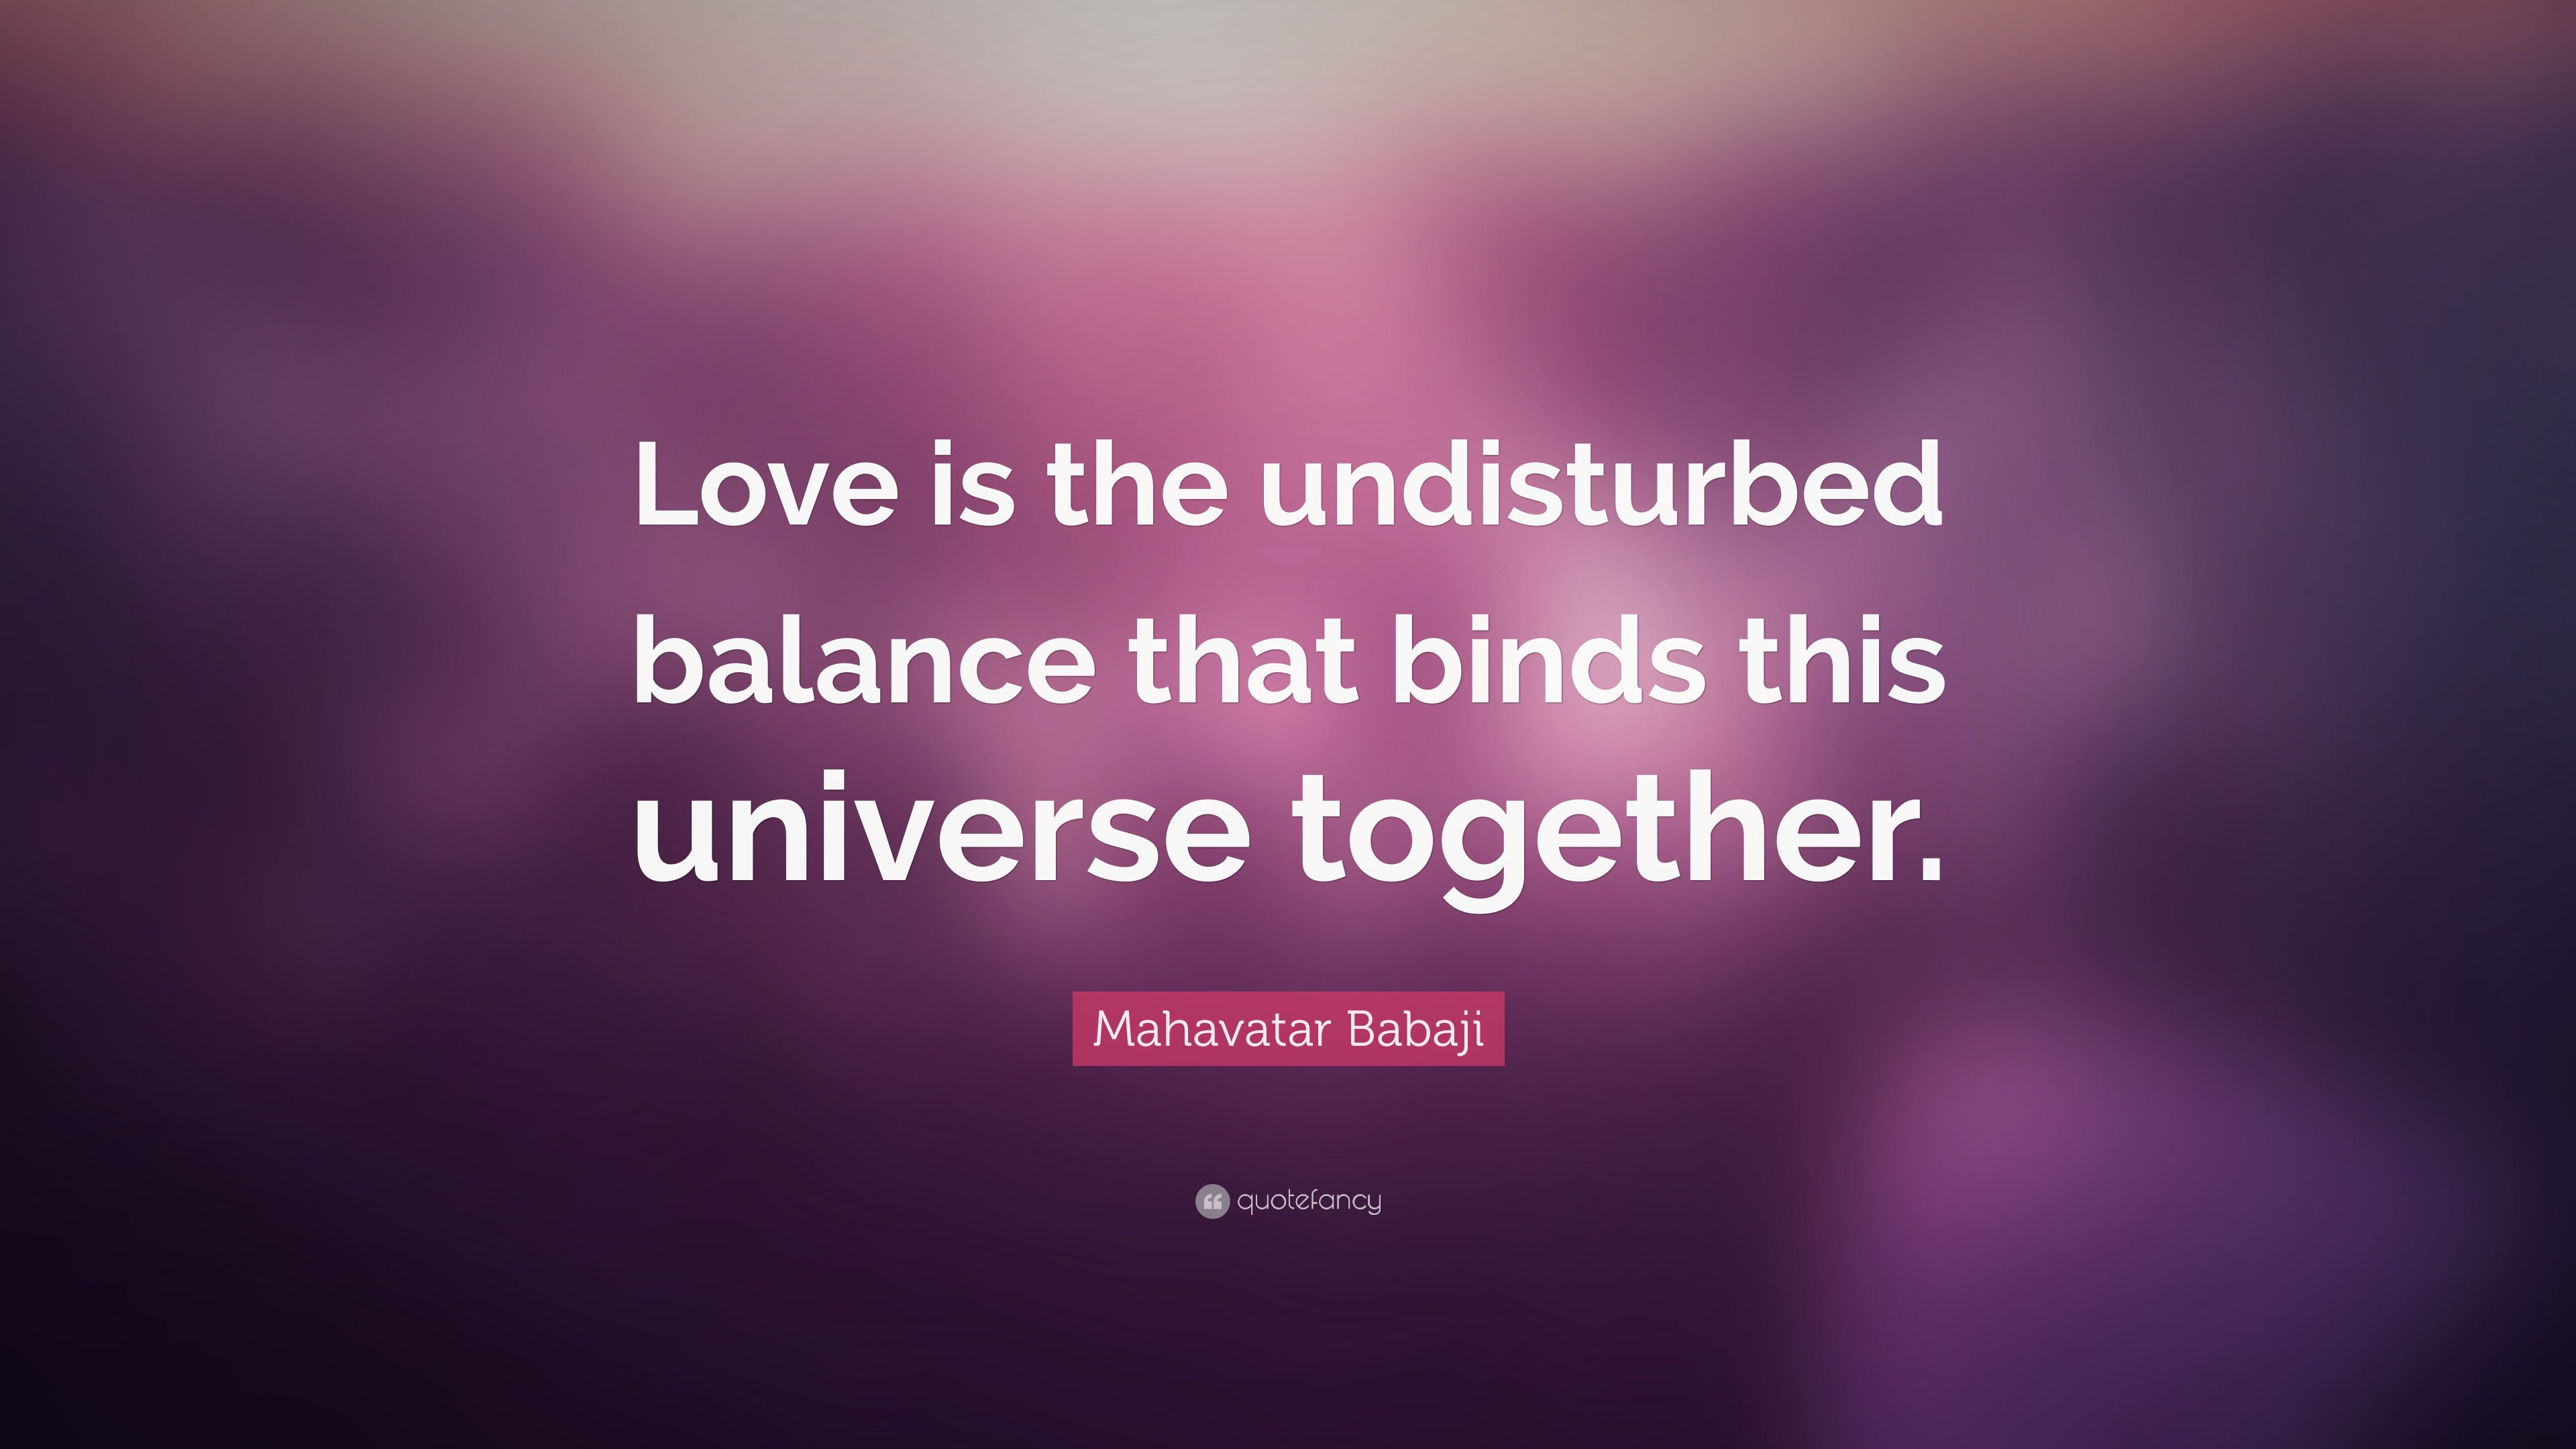 Mahavatar Babaji Quote: “Love is the undisturbed balance that binds this  universe together.”